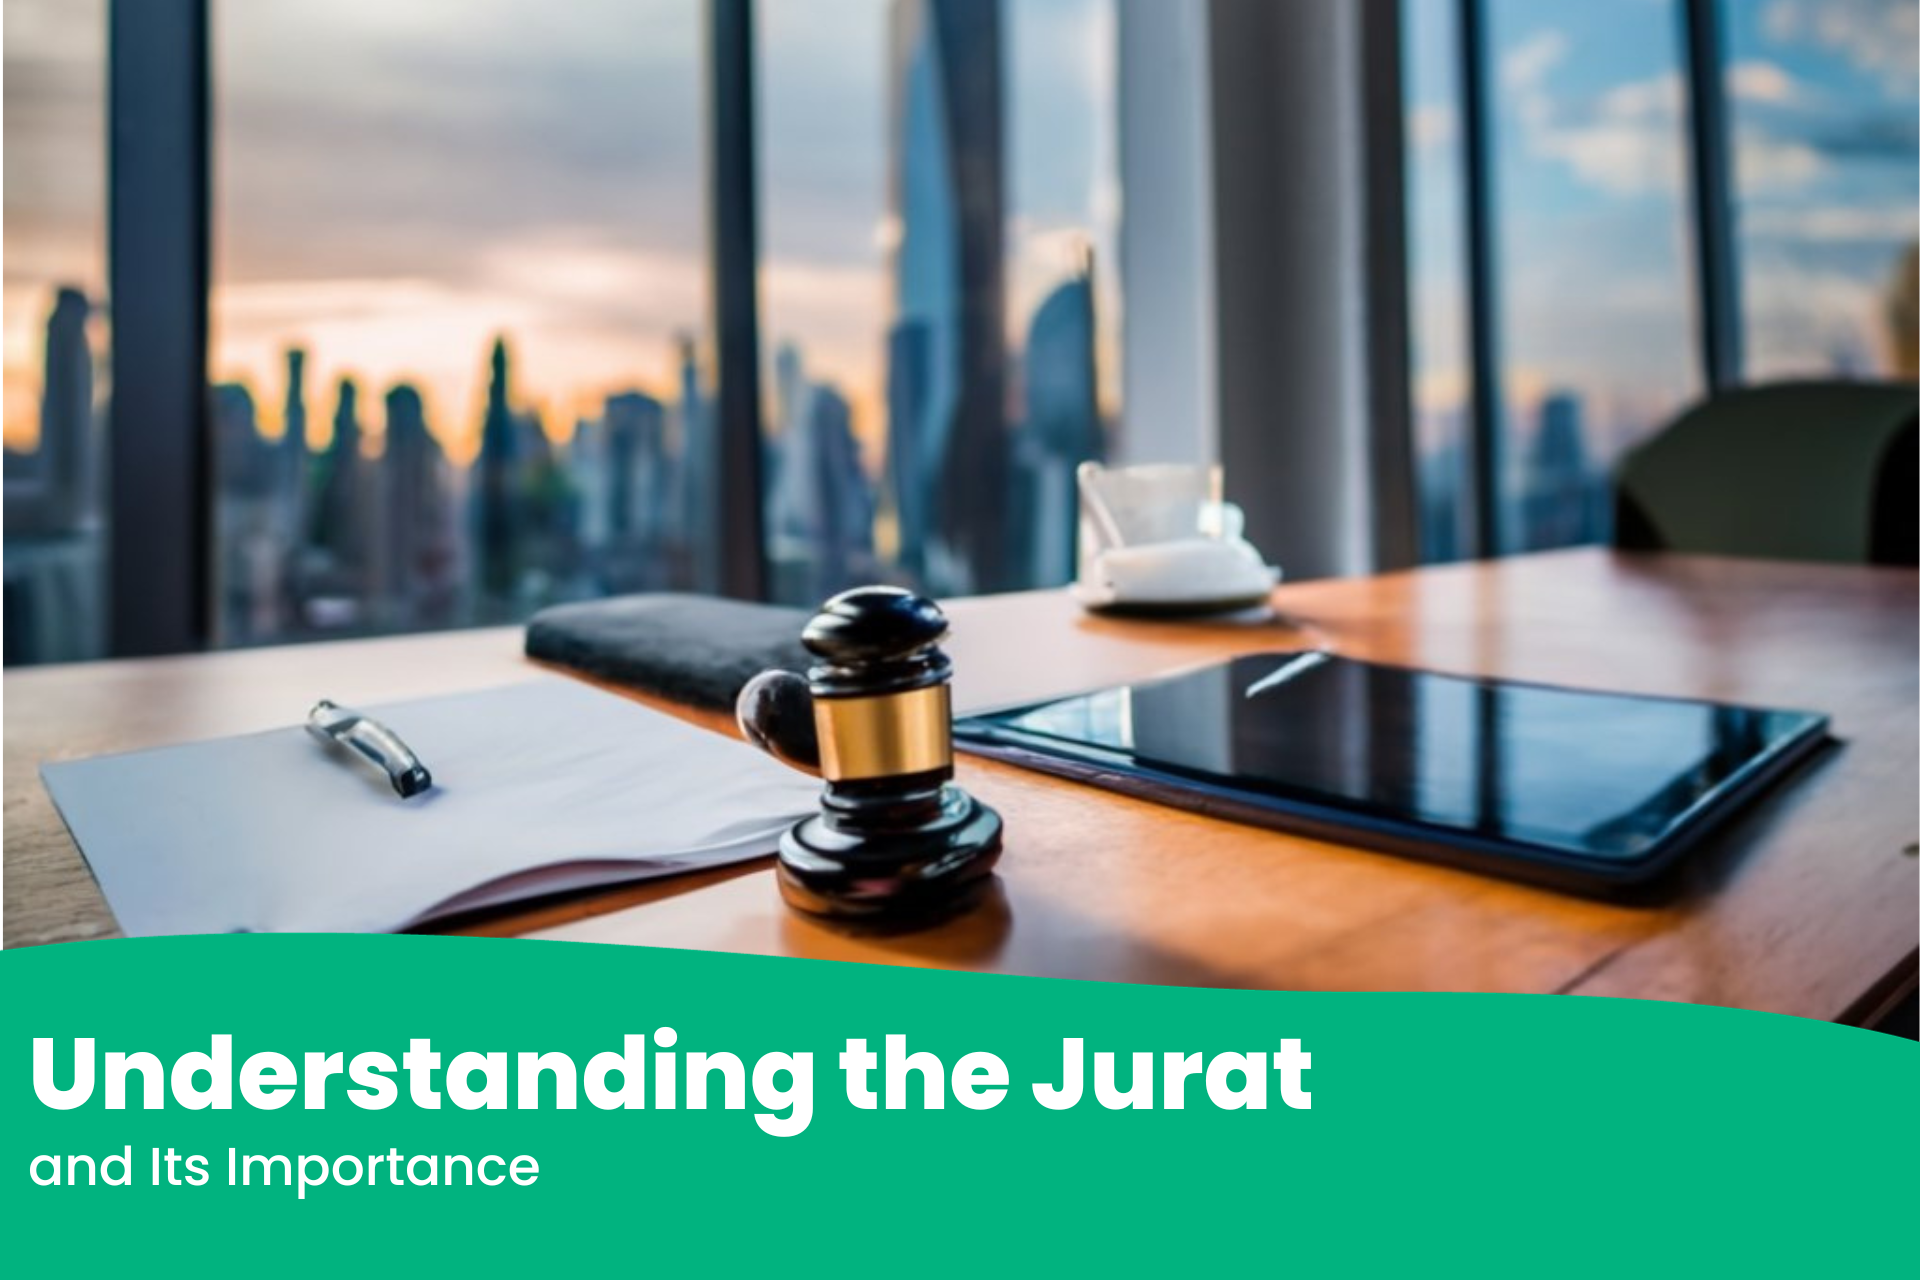 Jurat document setup with gavel and tablet, representing Las Vegas Notary services in an office overlooking a city skyline.